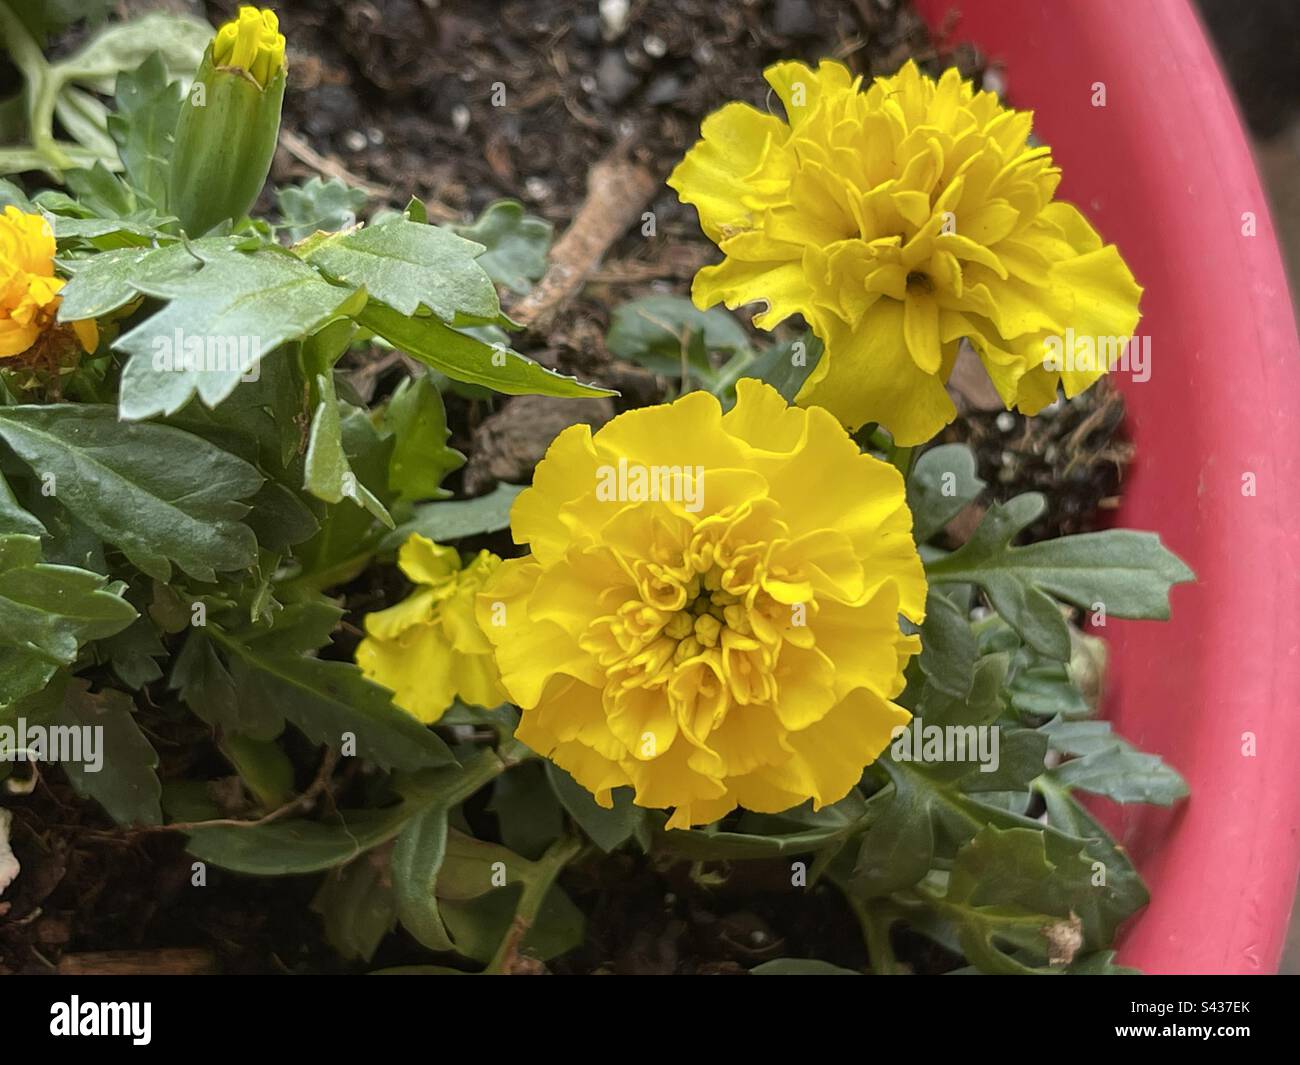 Yellow marigolds in a pint flower pot. Stock Photo